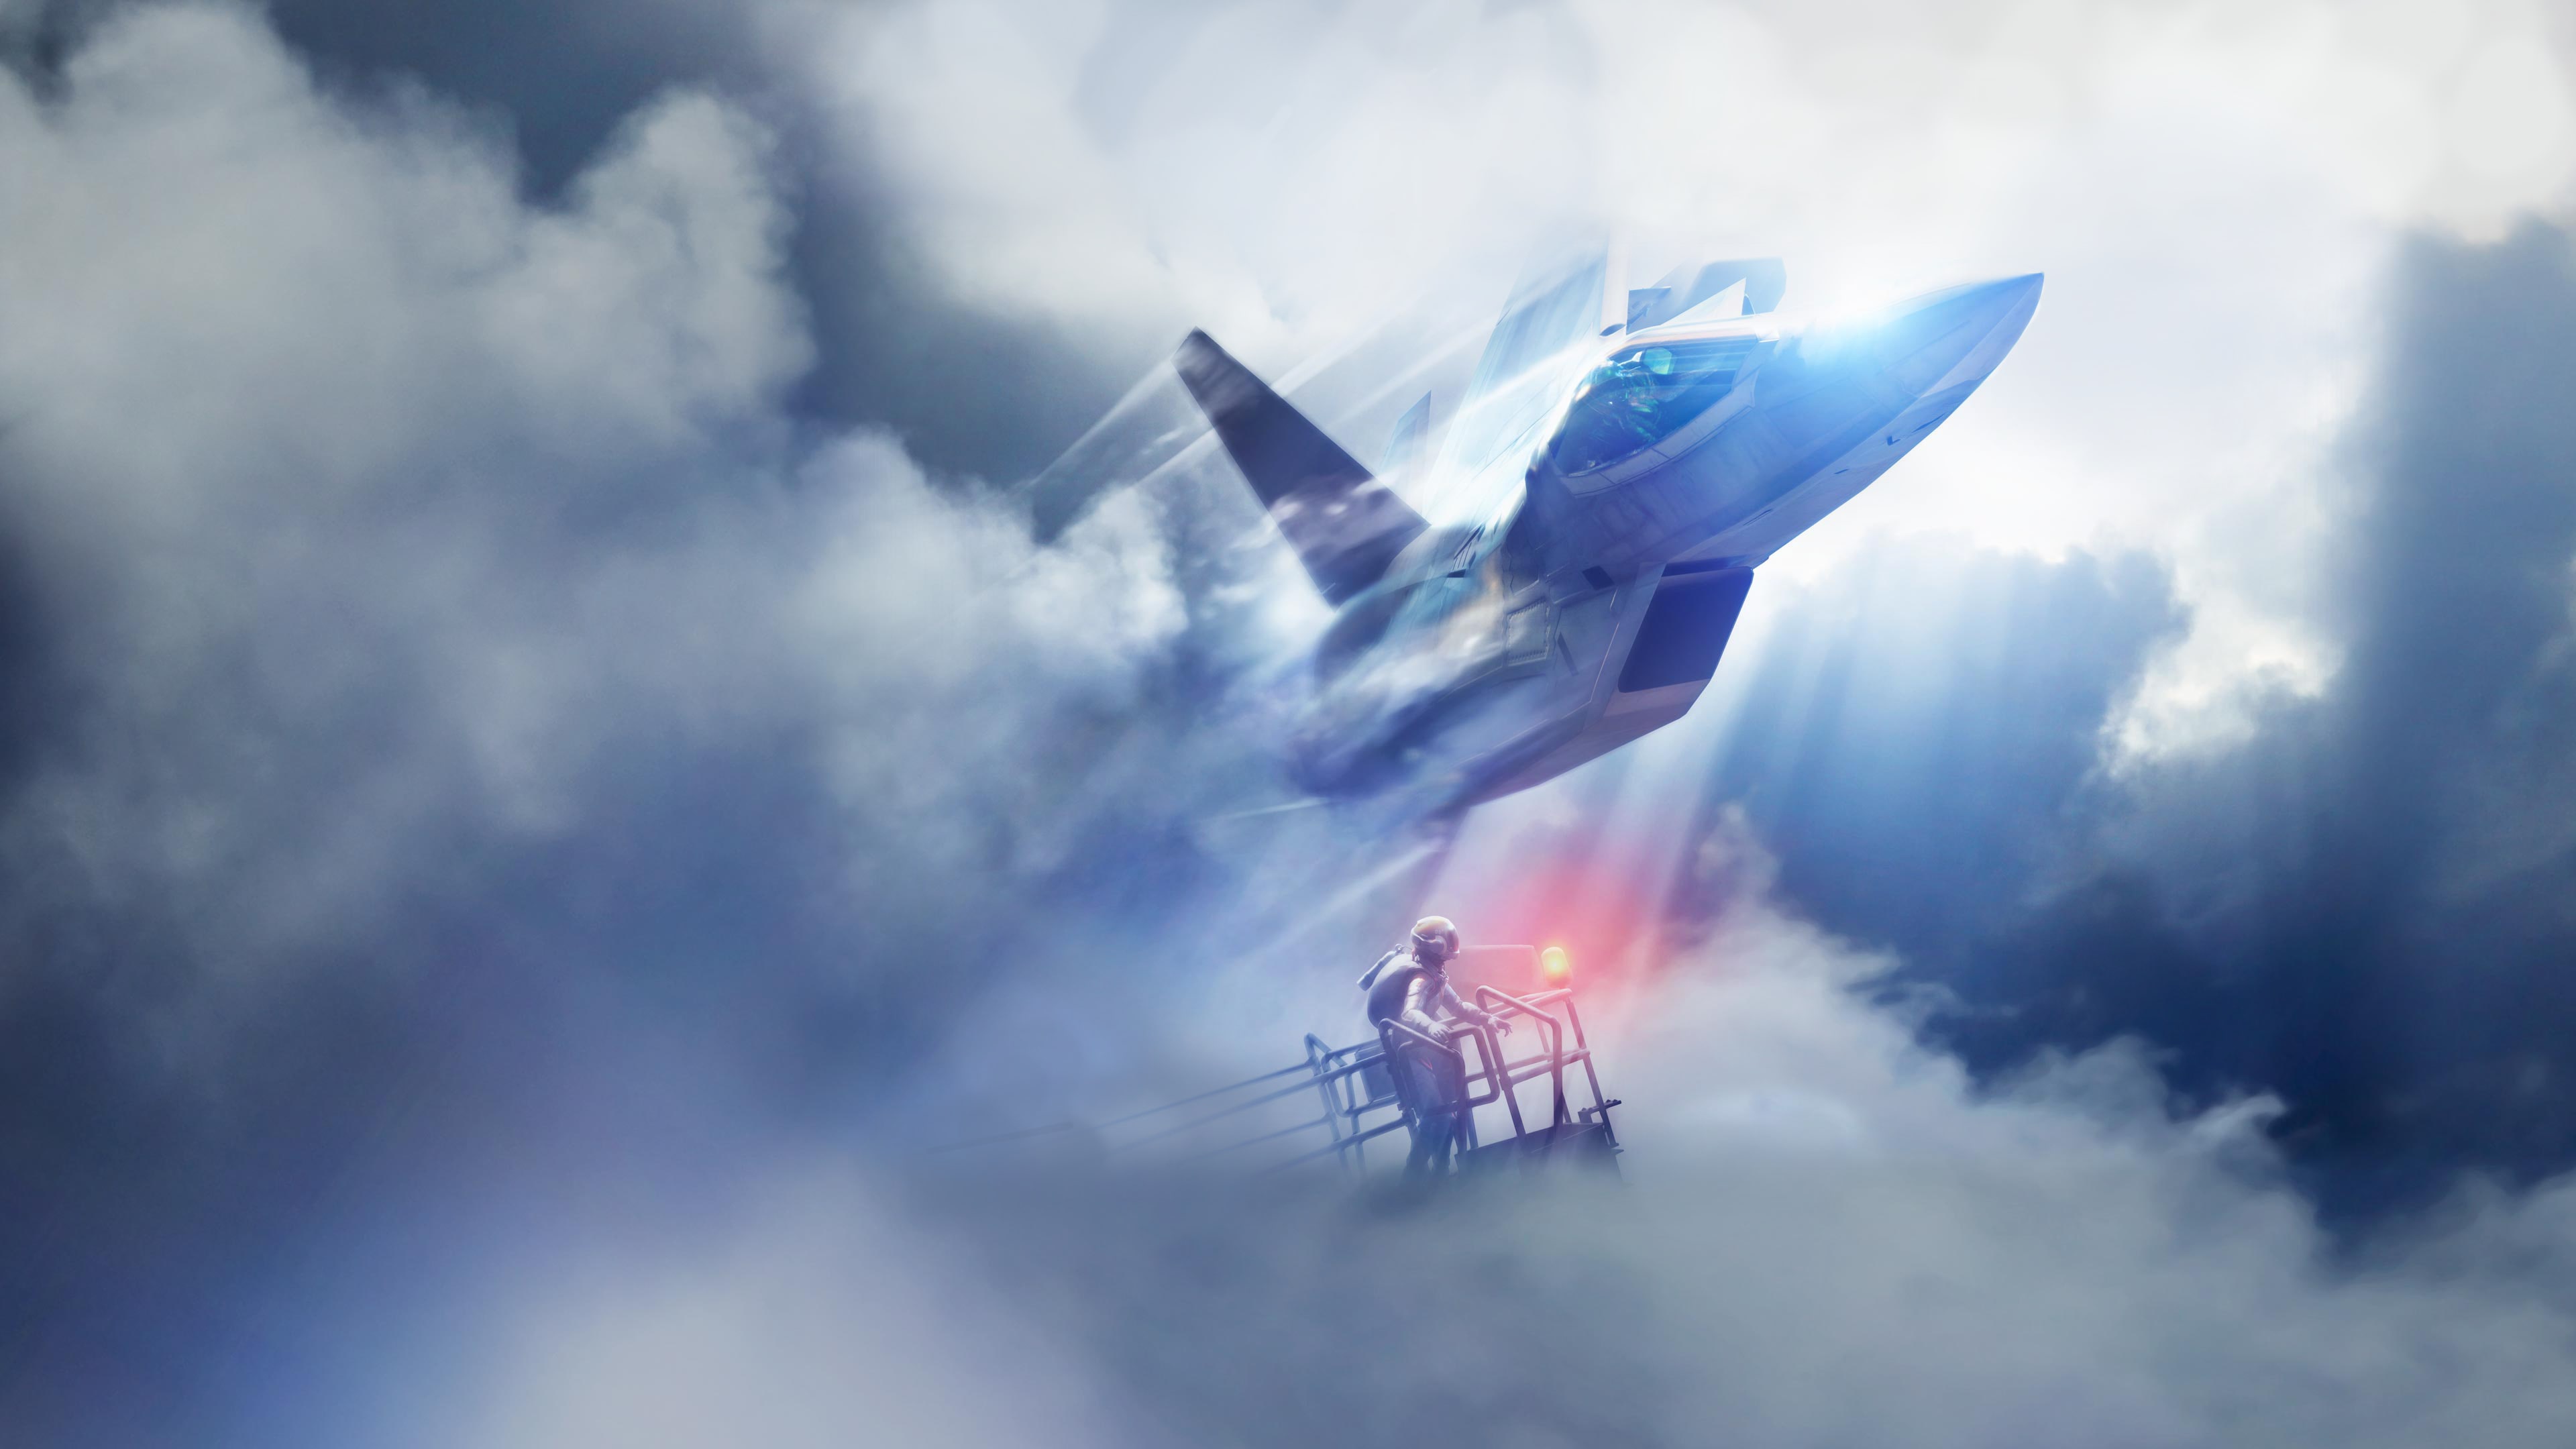 ACE COMBAT™ 7: SKIES UNKNOWN 25th Anniversary Edition